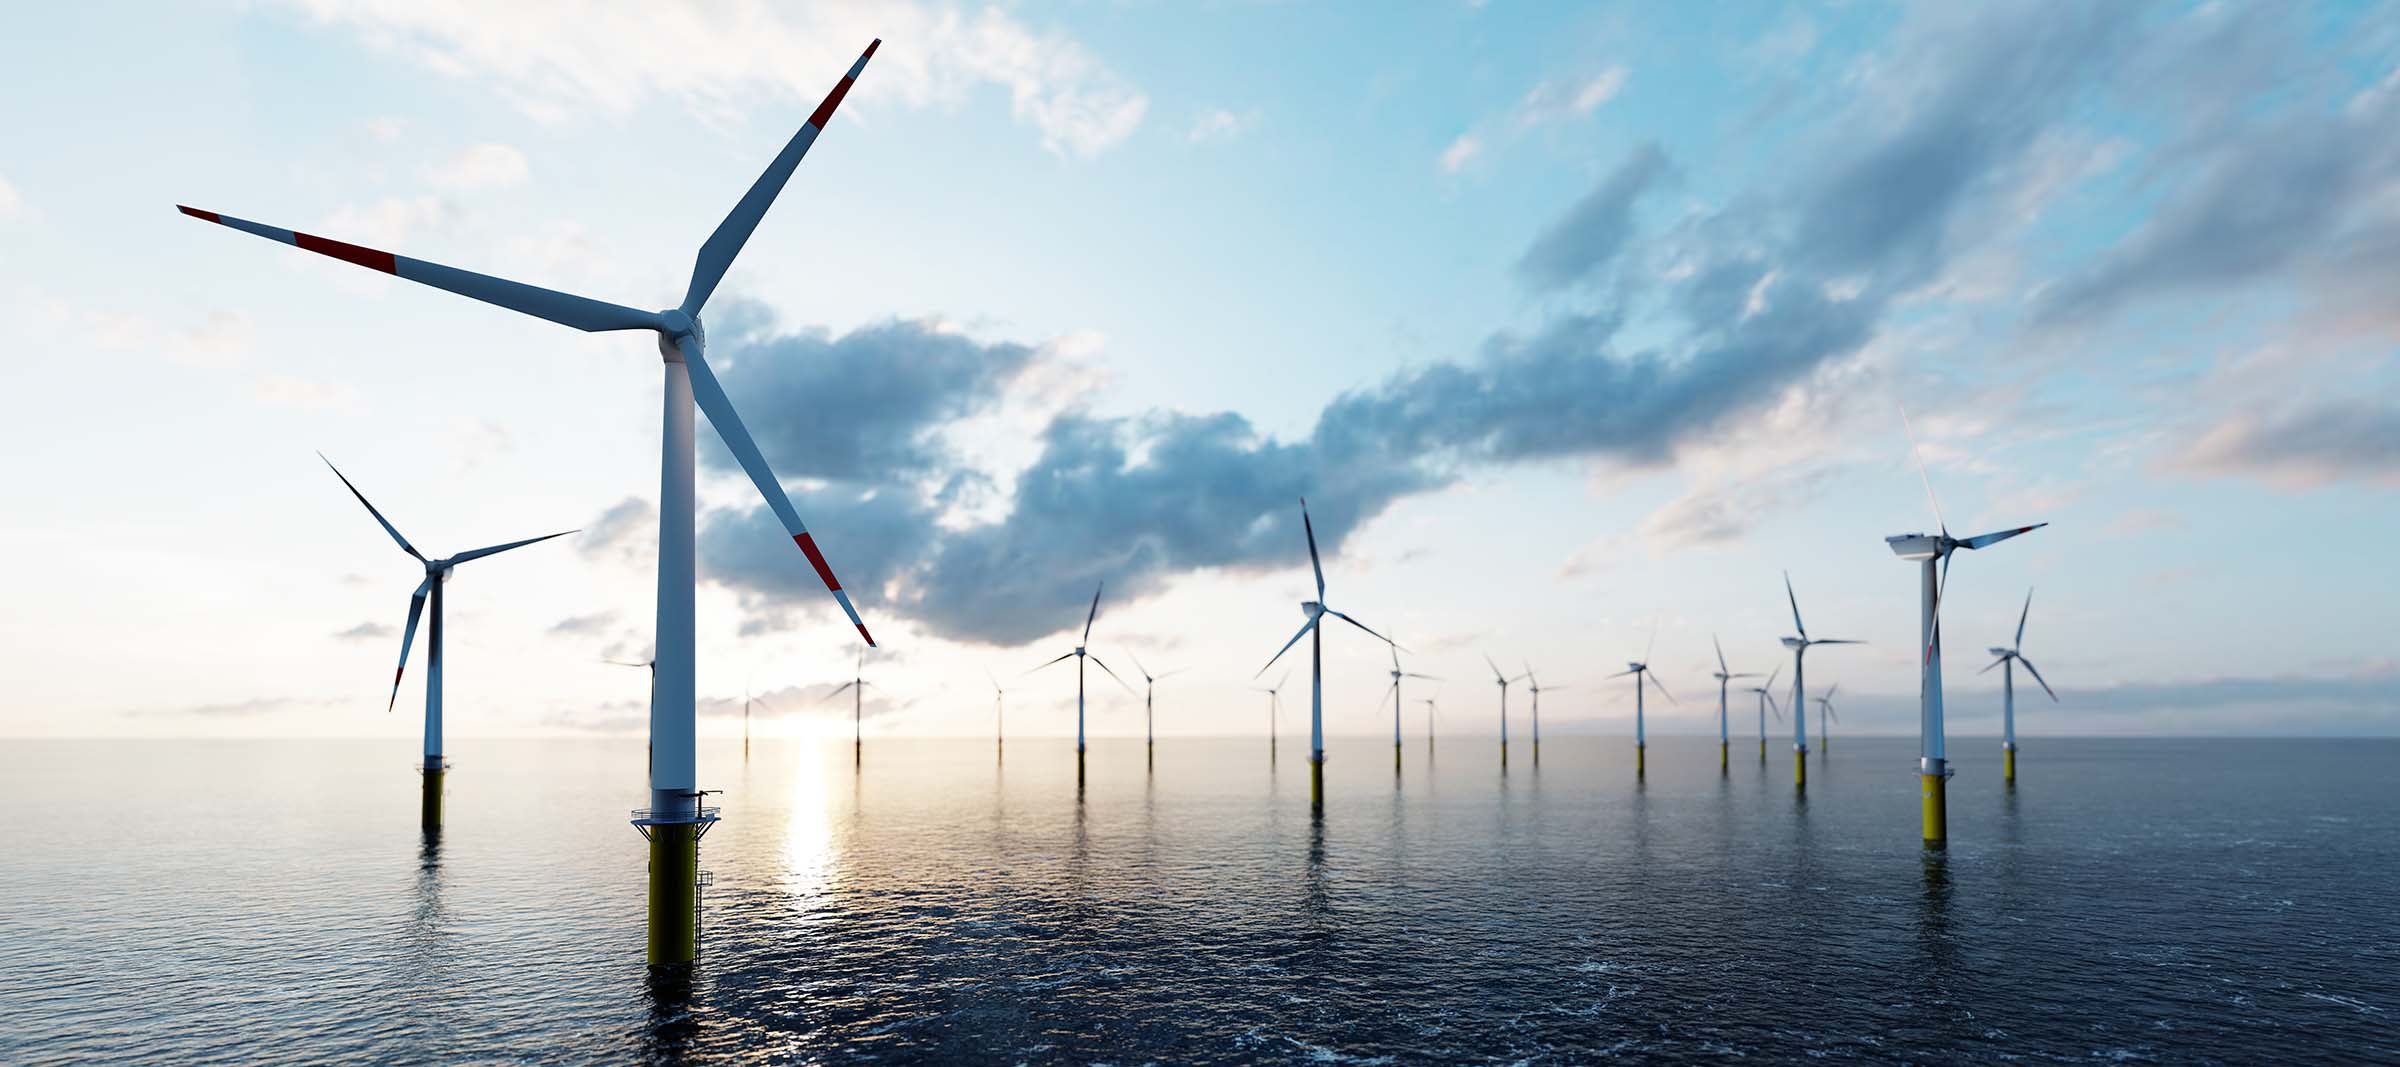 Shell seeks to sell its shares in Korean offshore wind project